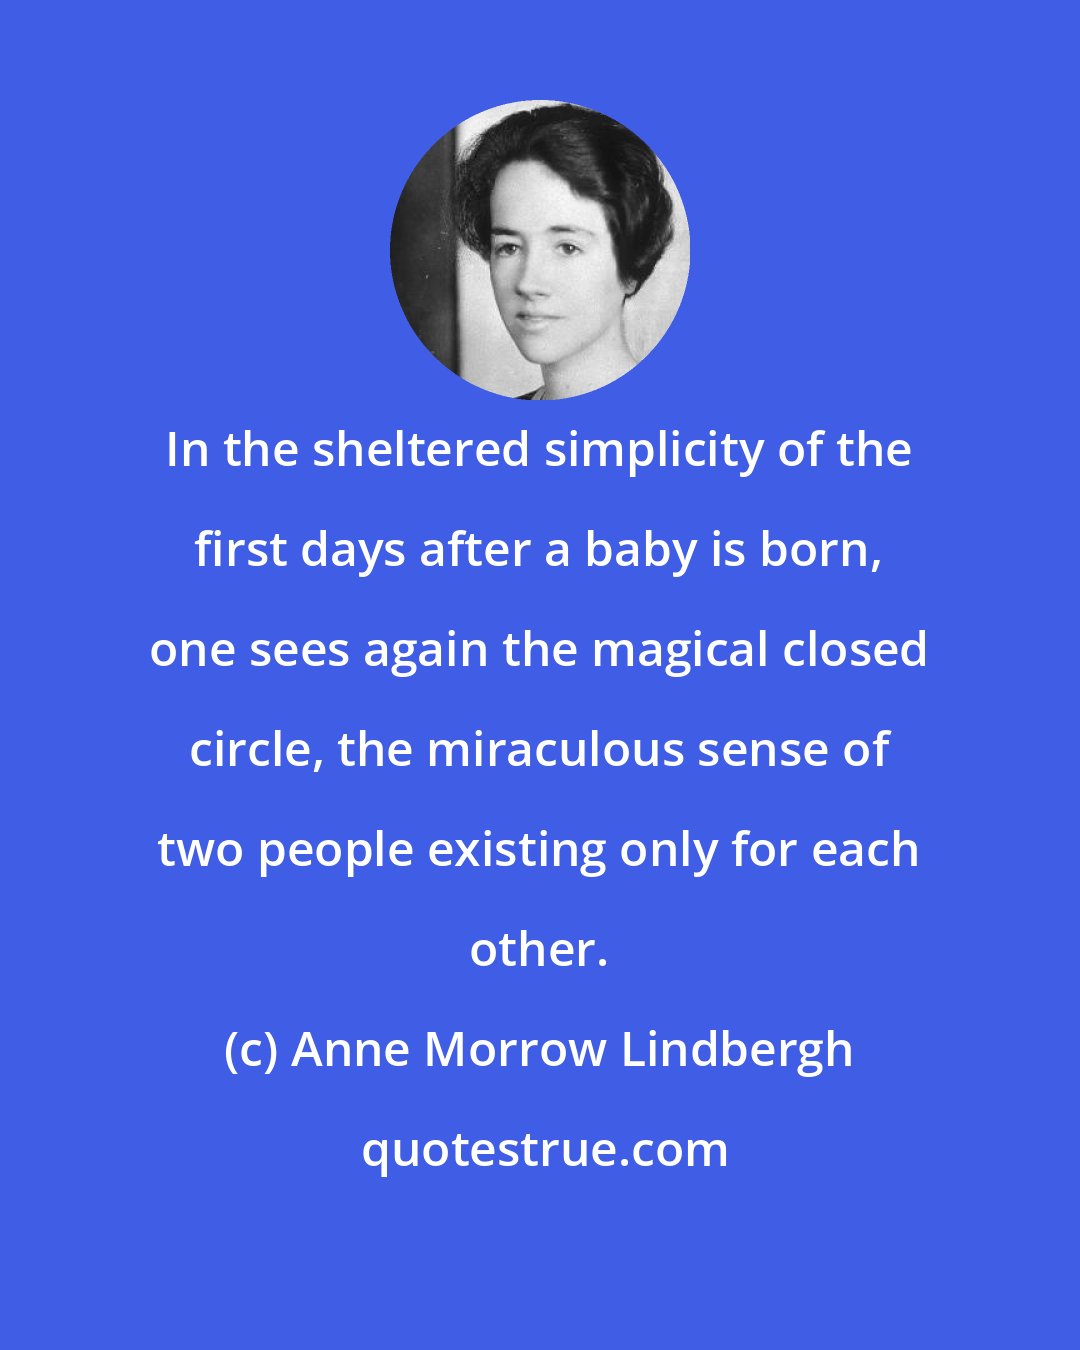 Anne Morrow Lindbergh: In the sheltered simplicity of the first days after a baby is born, one sees again the magical closed circle, the miraculous sense of two people existing only for each other.